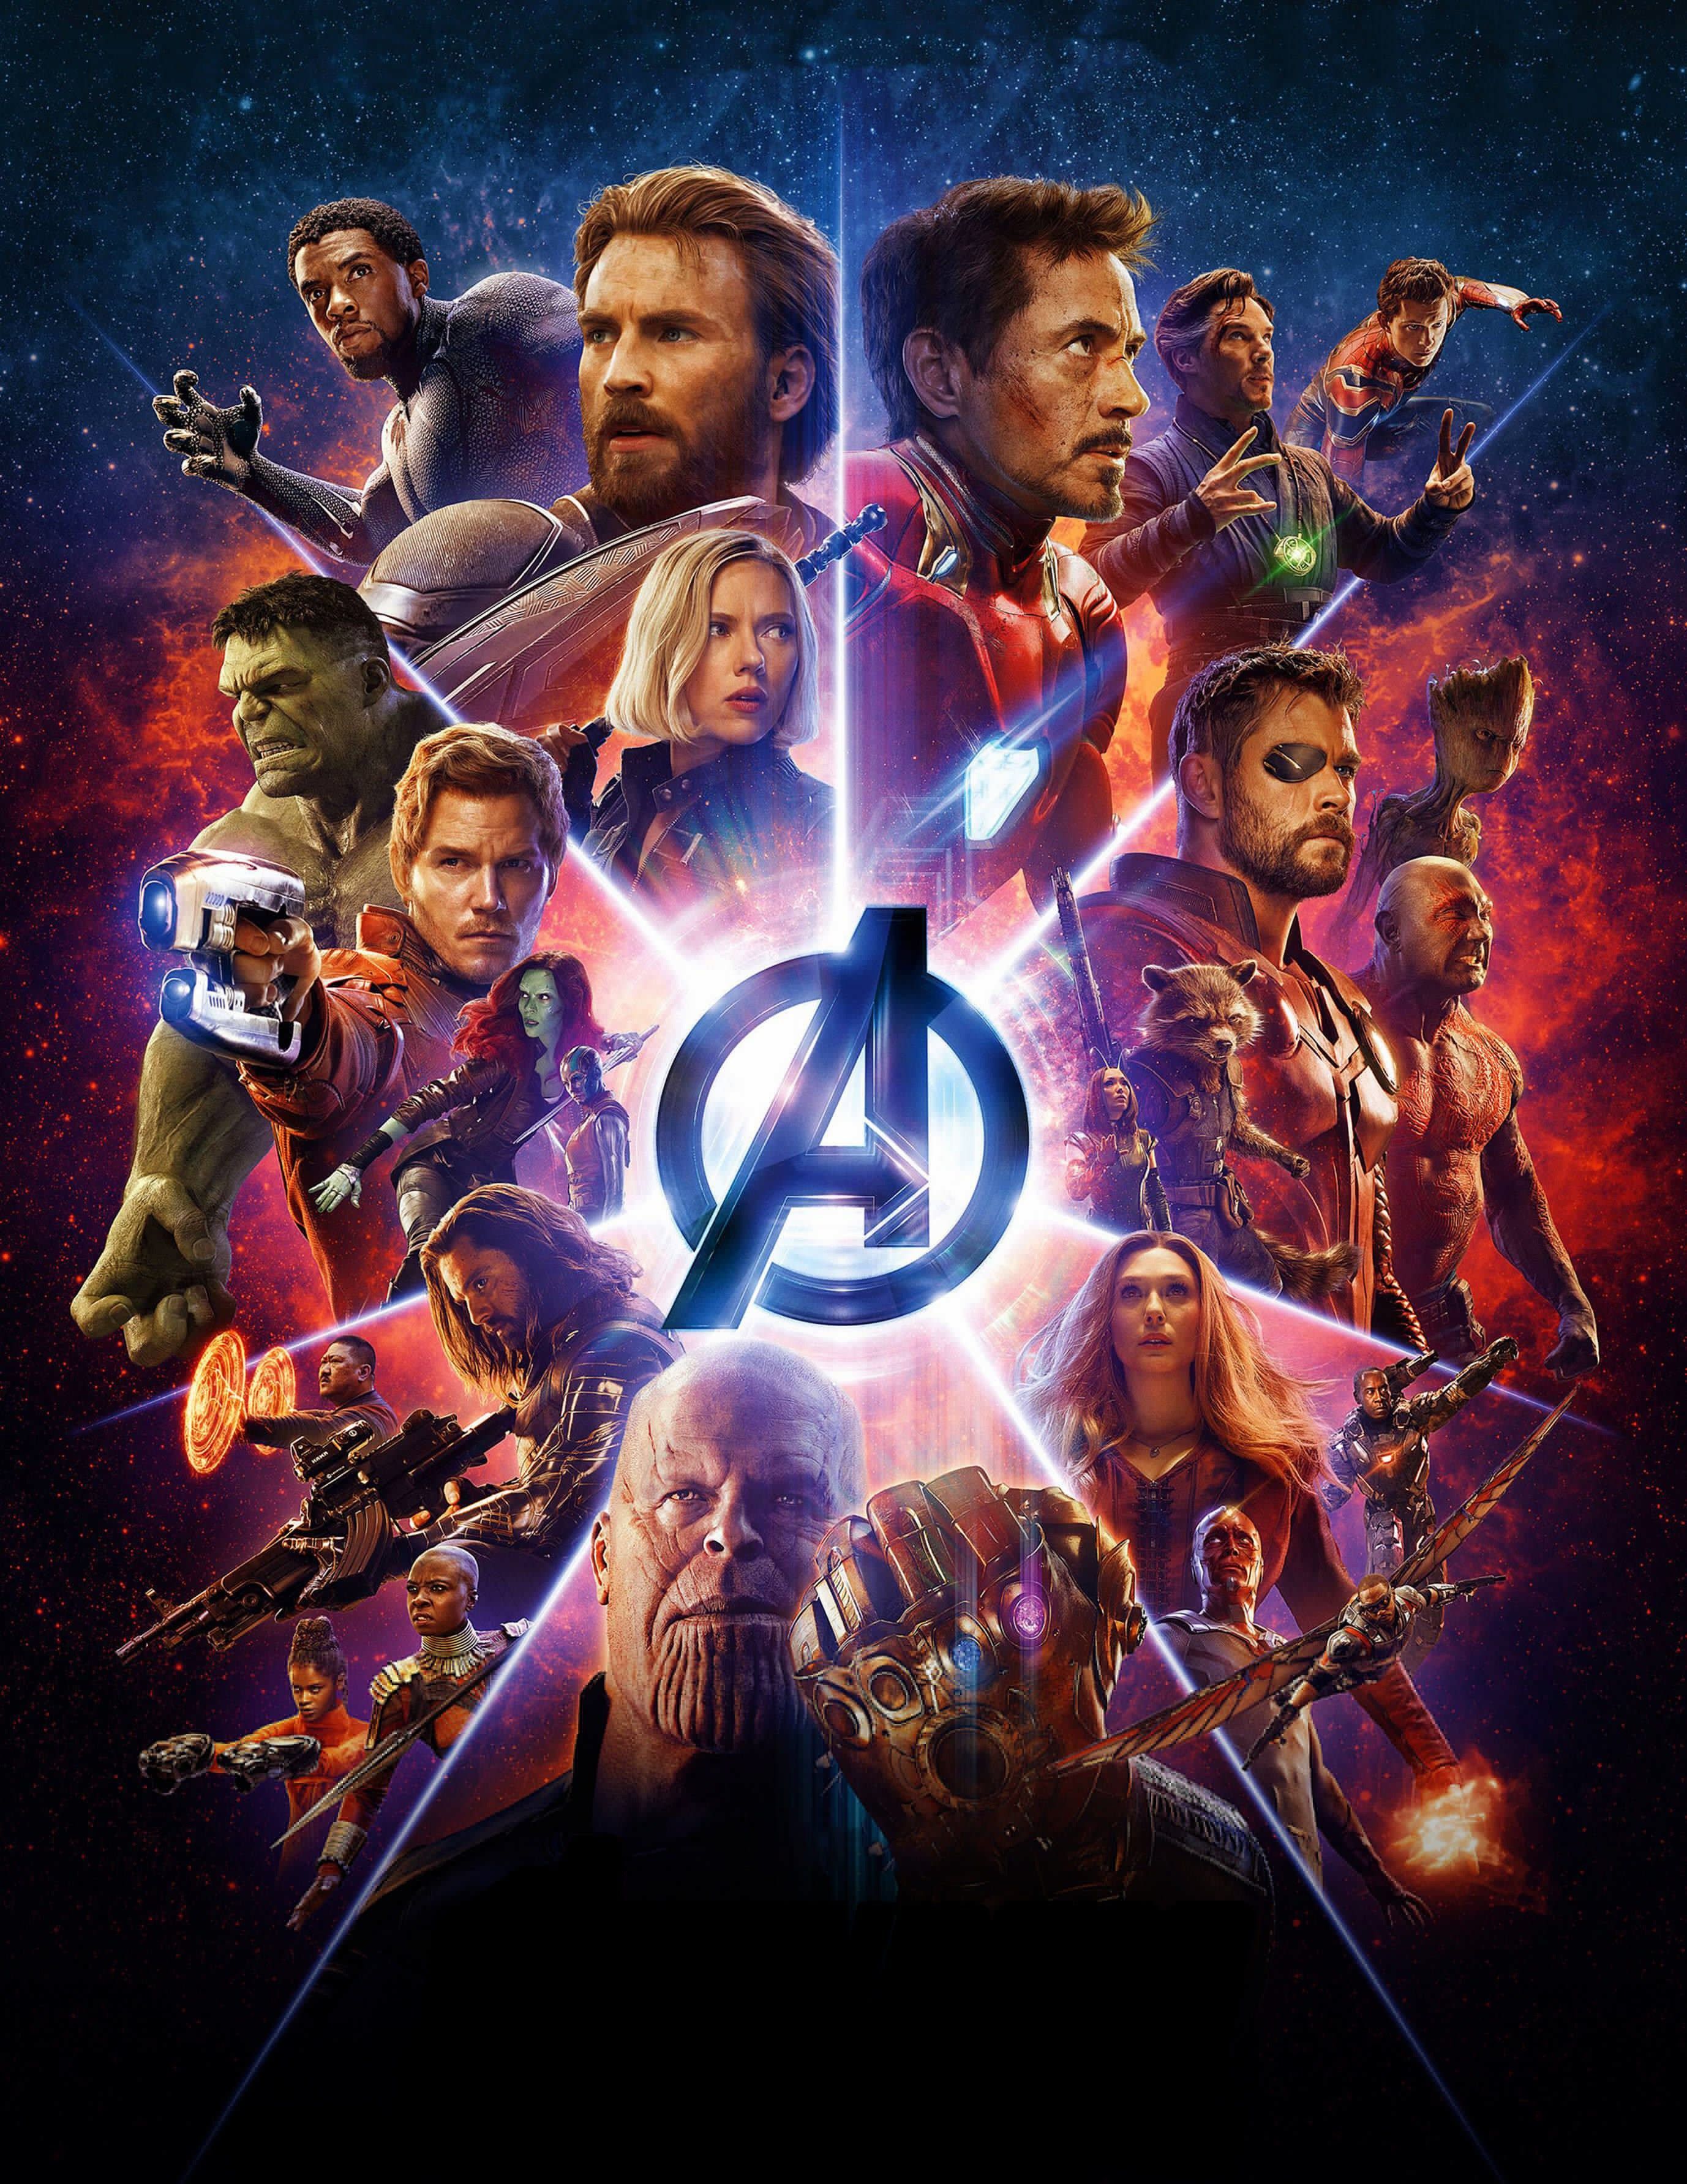 Avengers wallpapers for iPhone, iPad and desktop